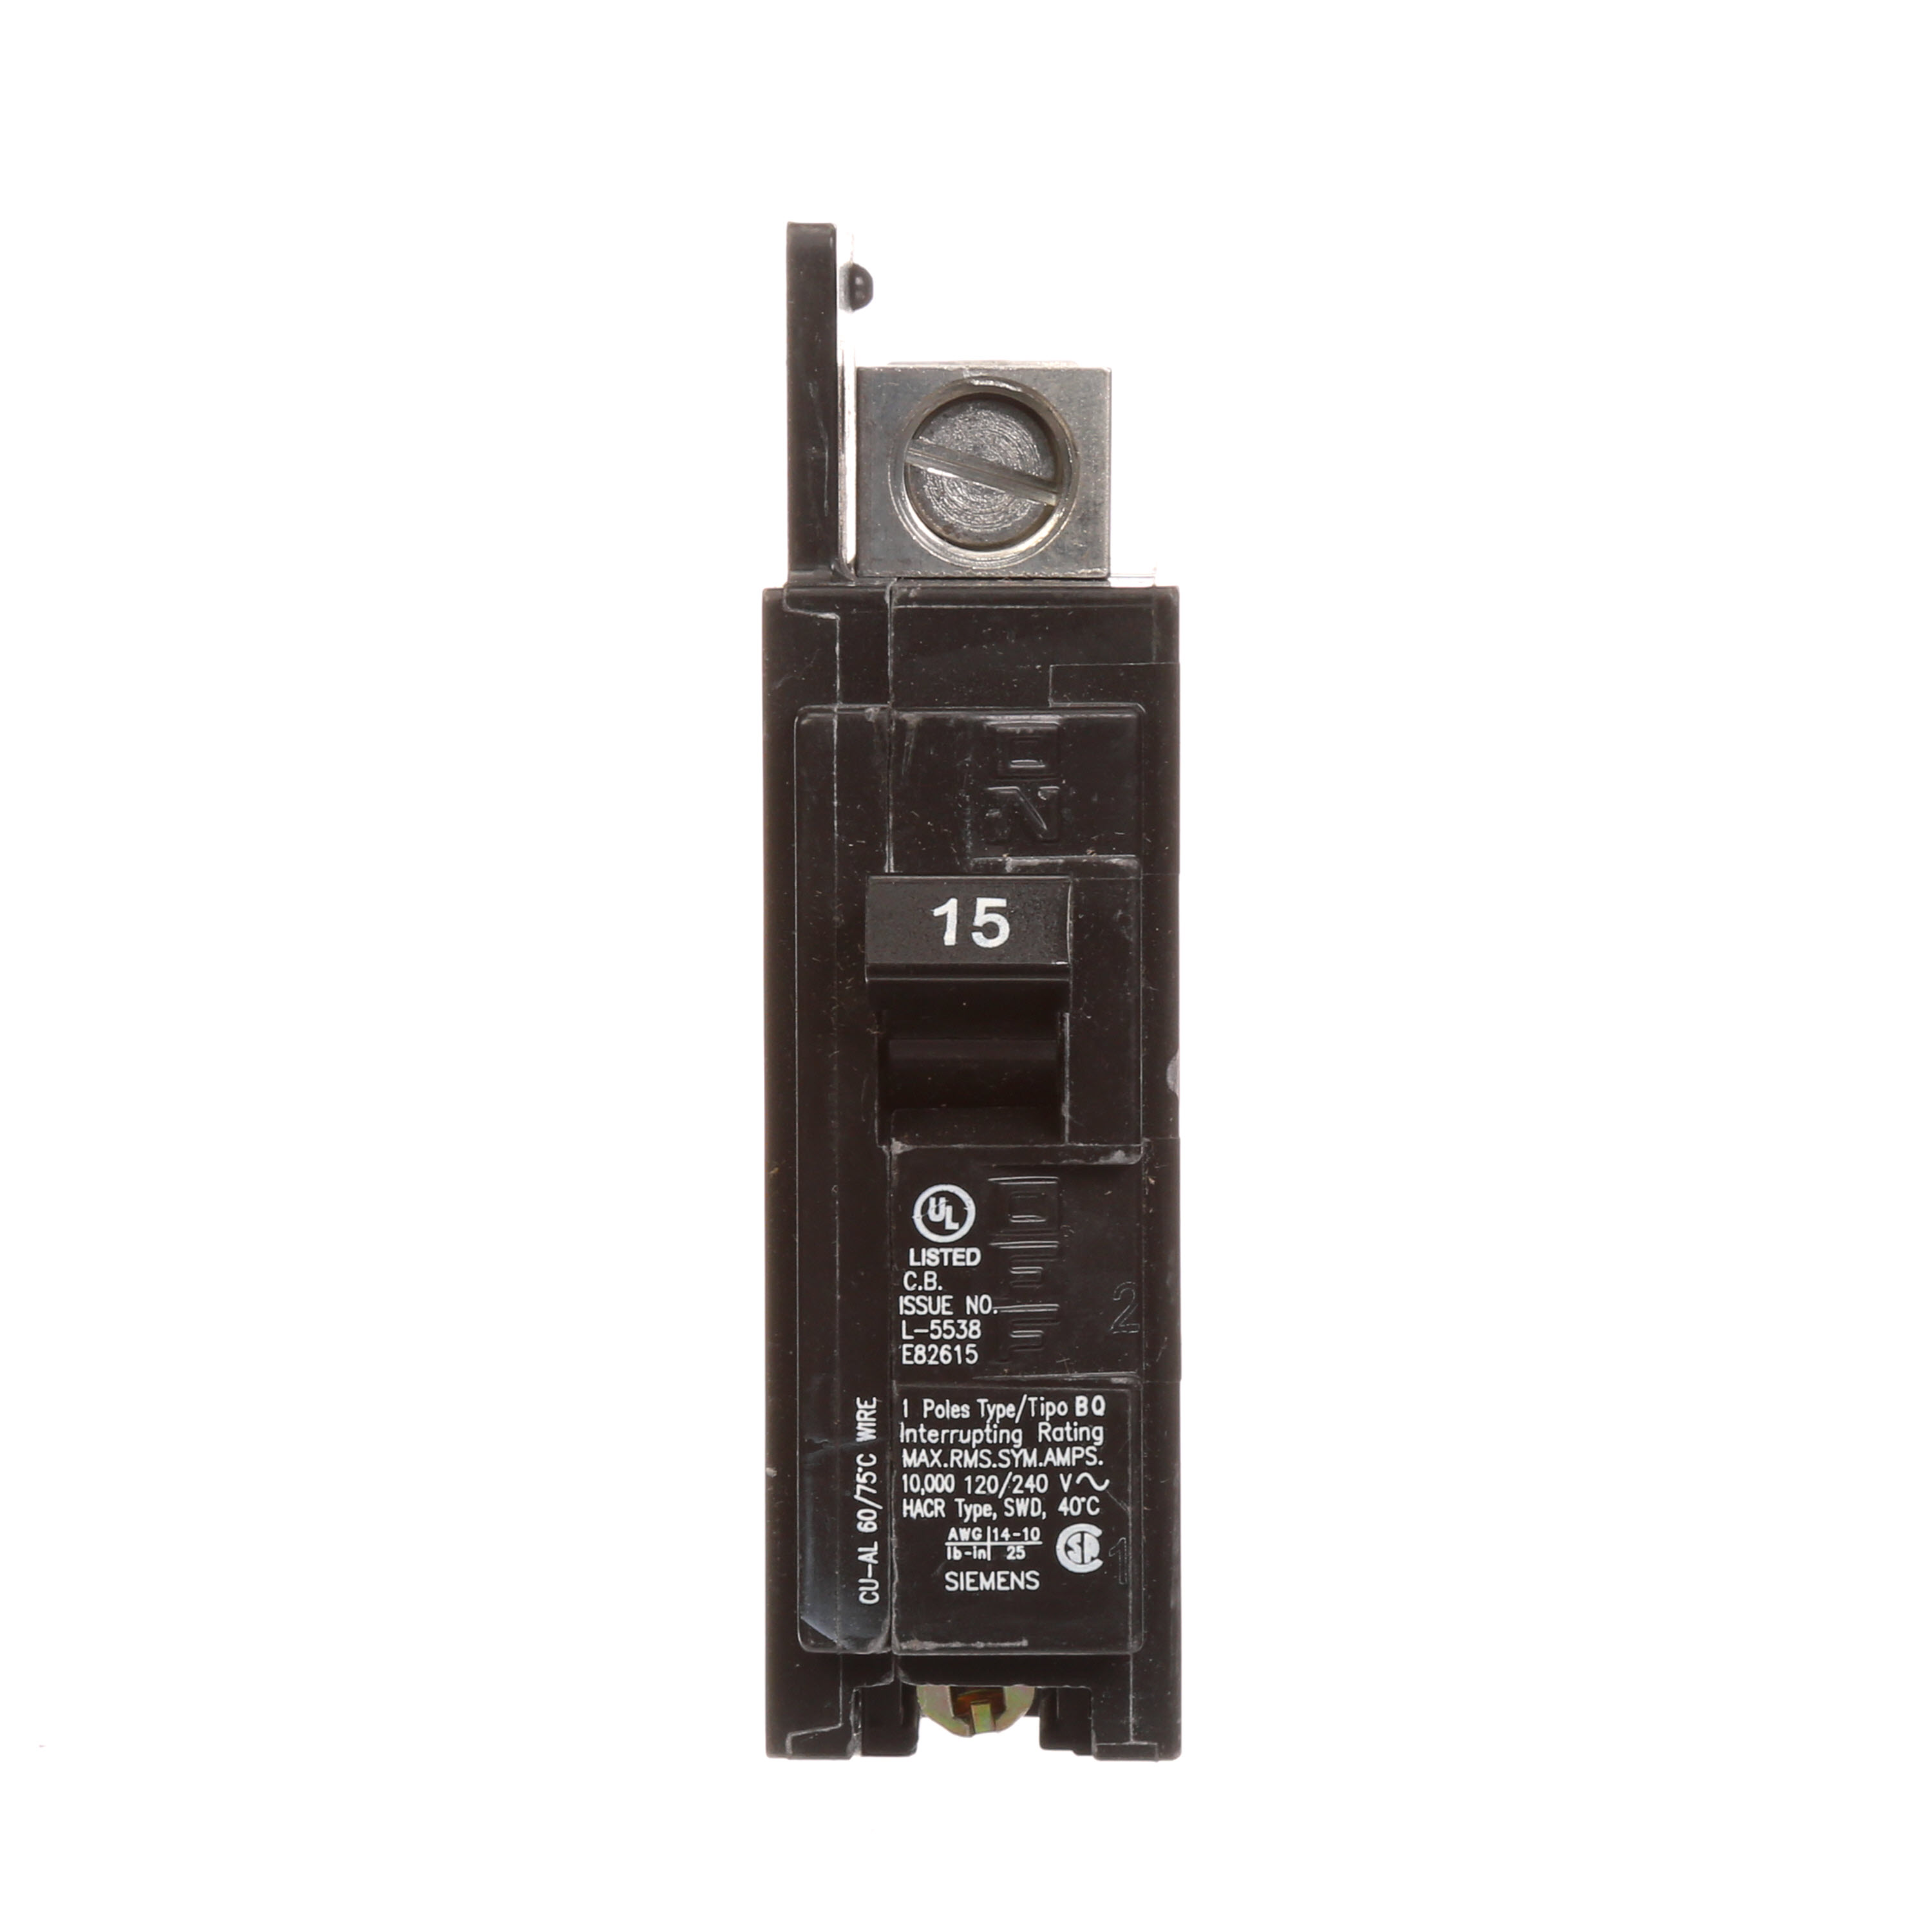 Siemens Low Voltage Molded Case Circuit Breakers General Purpose MCCBs are Circuit Protection Molded Case Circuit Breakers. 1-Pole circuit breaker type BQ. Rated 120V (015A) (AIR 10 kA). Special features line side lugs included. Note Load side lugs are included.